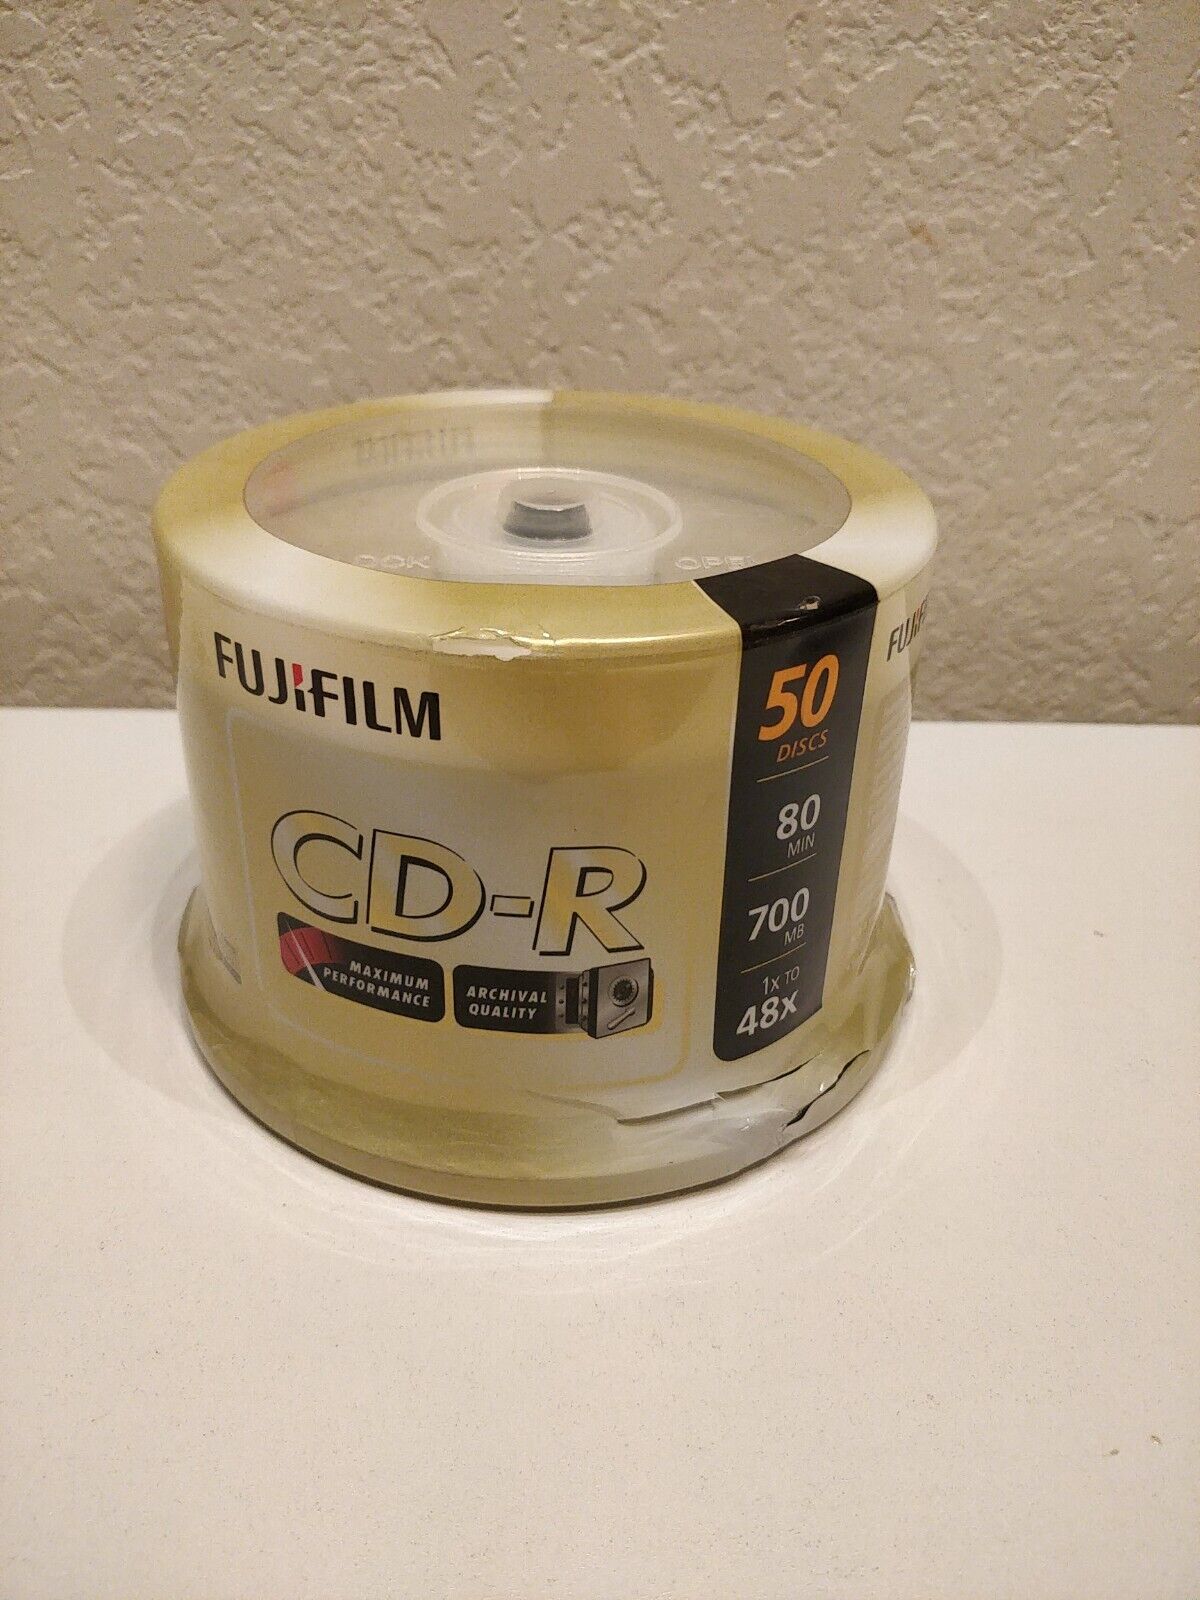 Fujifilm CD-R 80min 700MB/Mo, up to 48X write speed, 50 pack, New